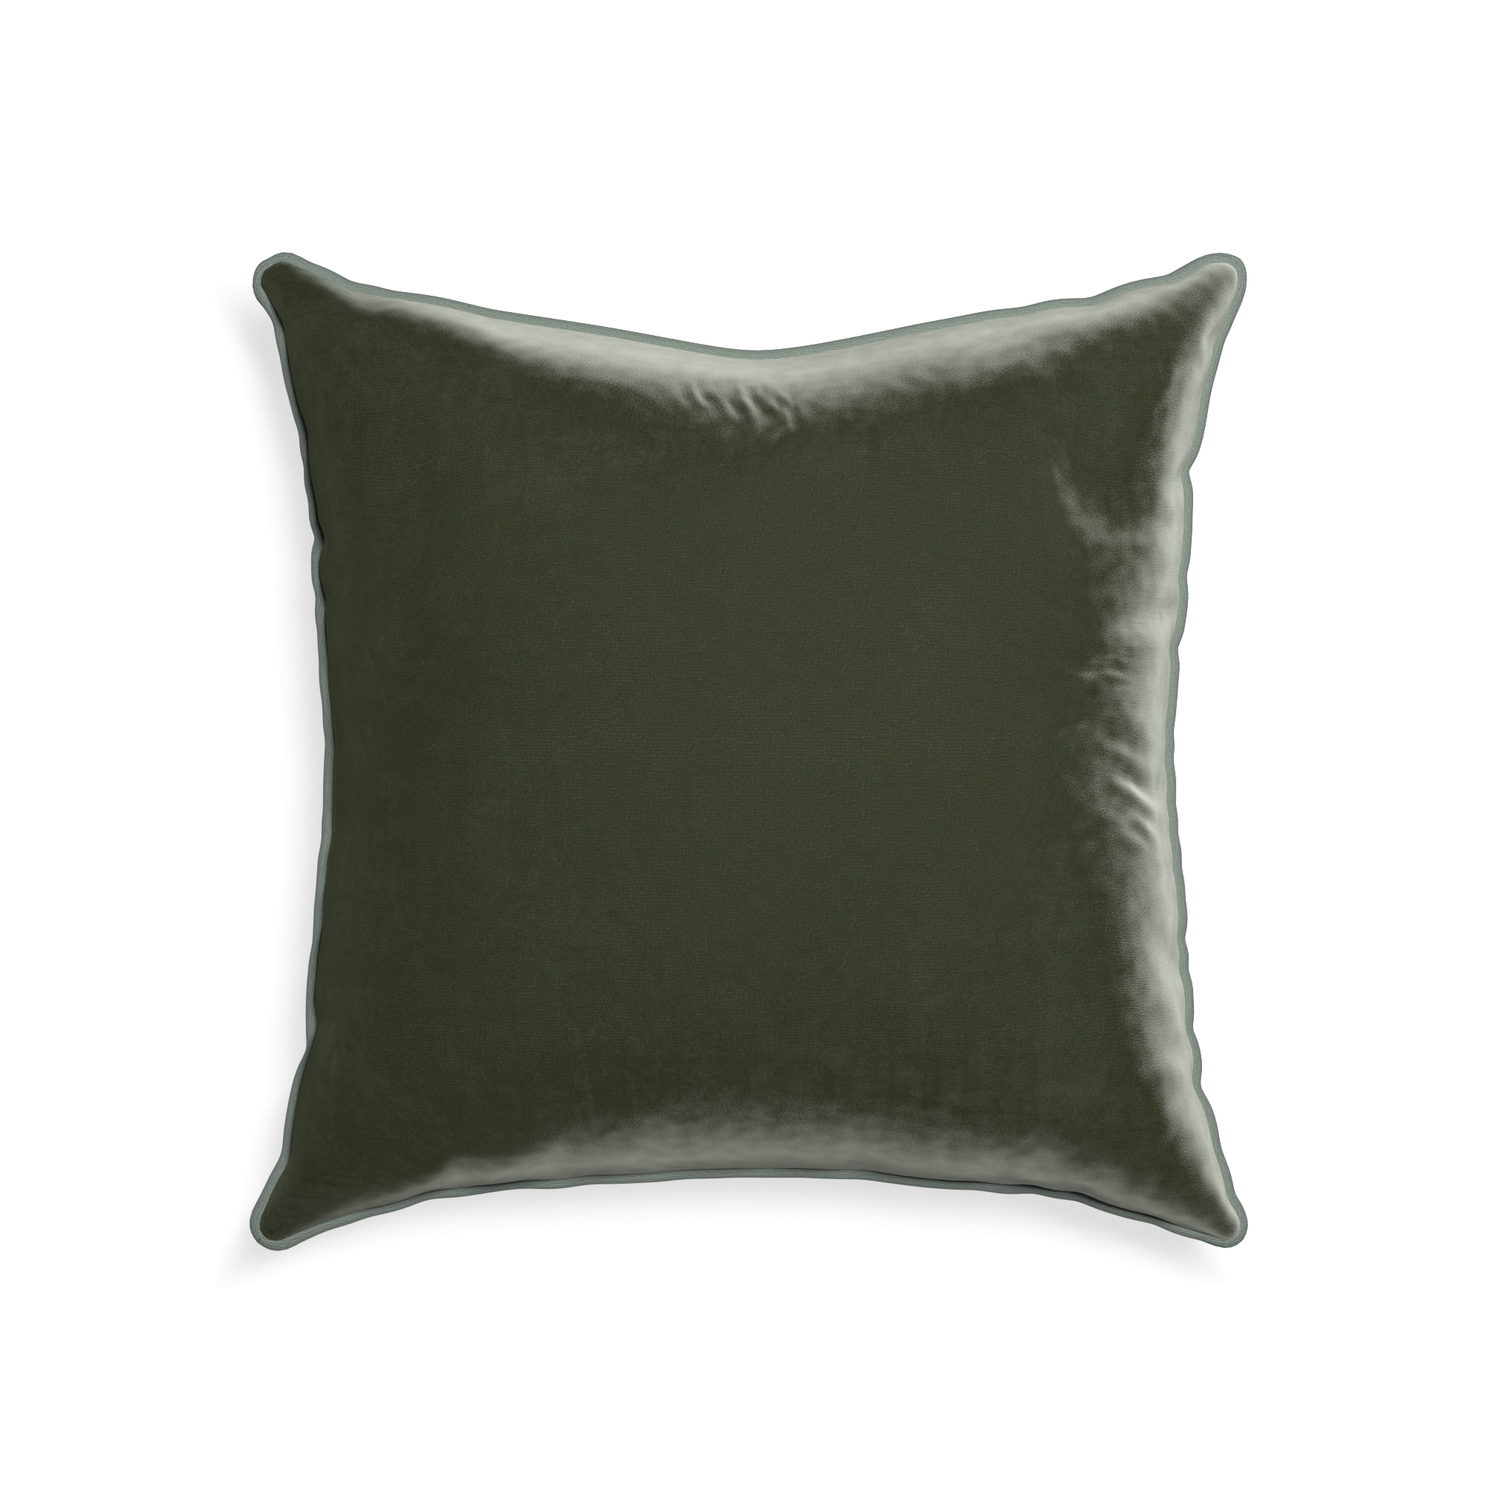 22-square fern velvet custom fern greenpillow with sage piping on white background